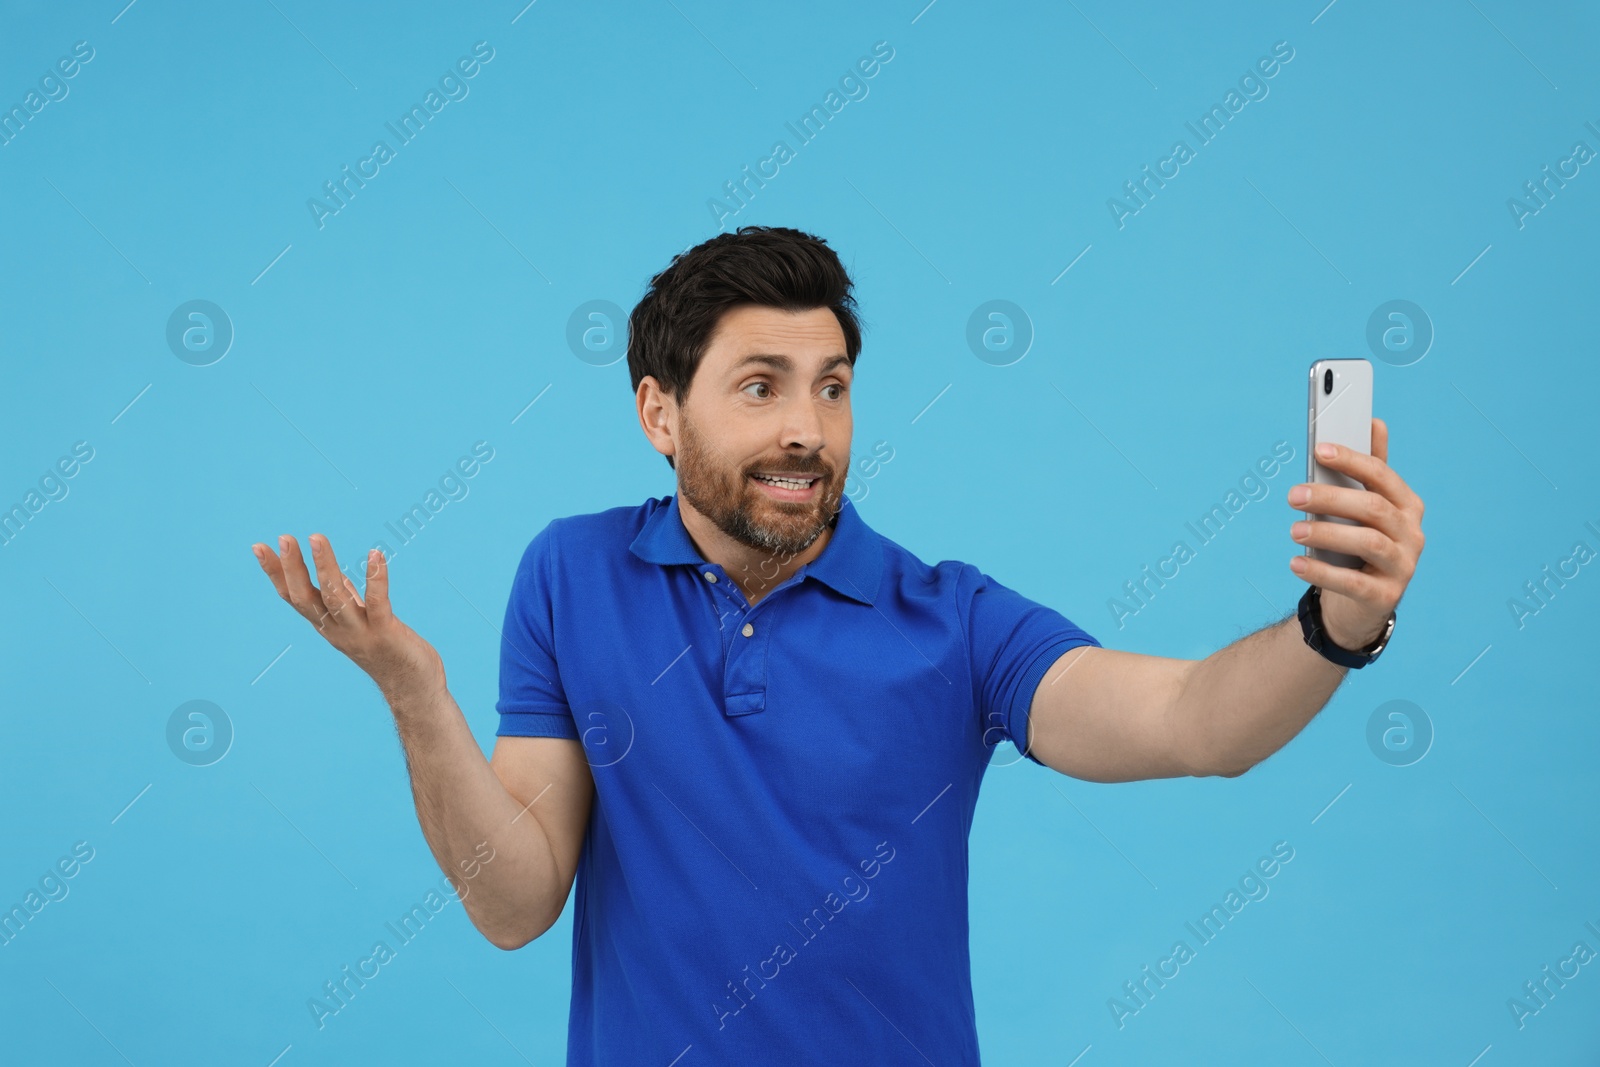 Photo of Puzzled man taking selfie with smartphone on light blue background